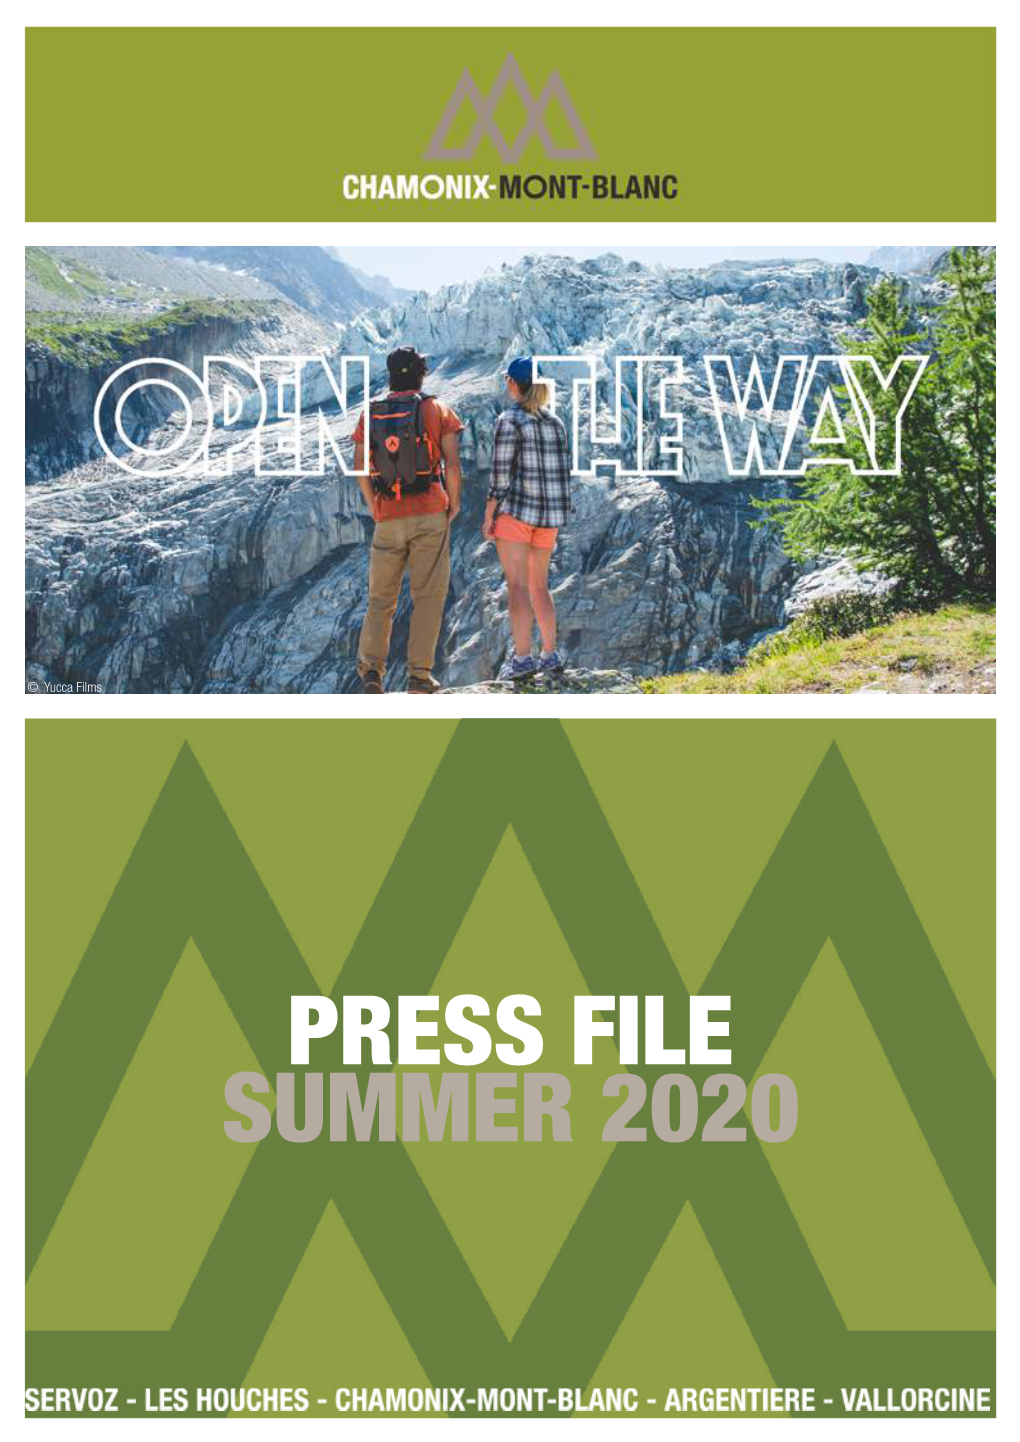 Press File Summer 2020 New Brand Strategy for the Chamonix-Mont-Blanc Valley